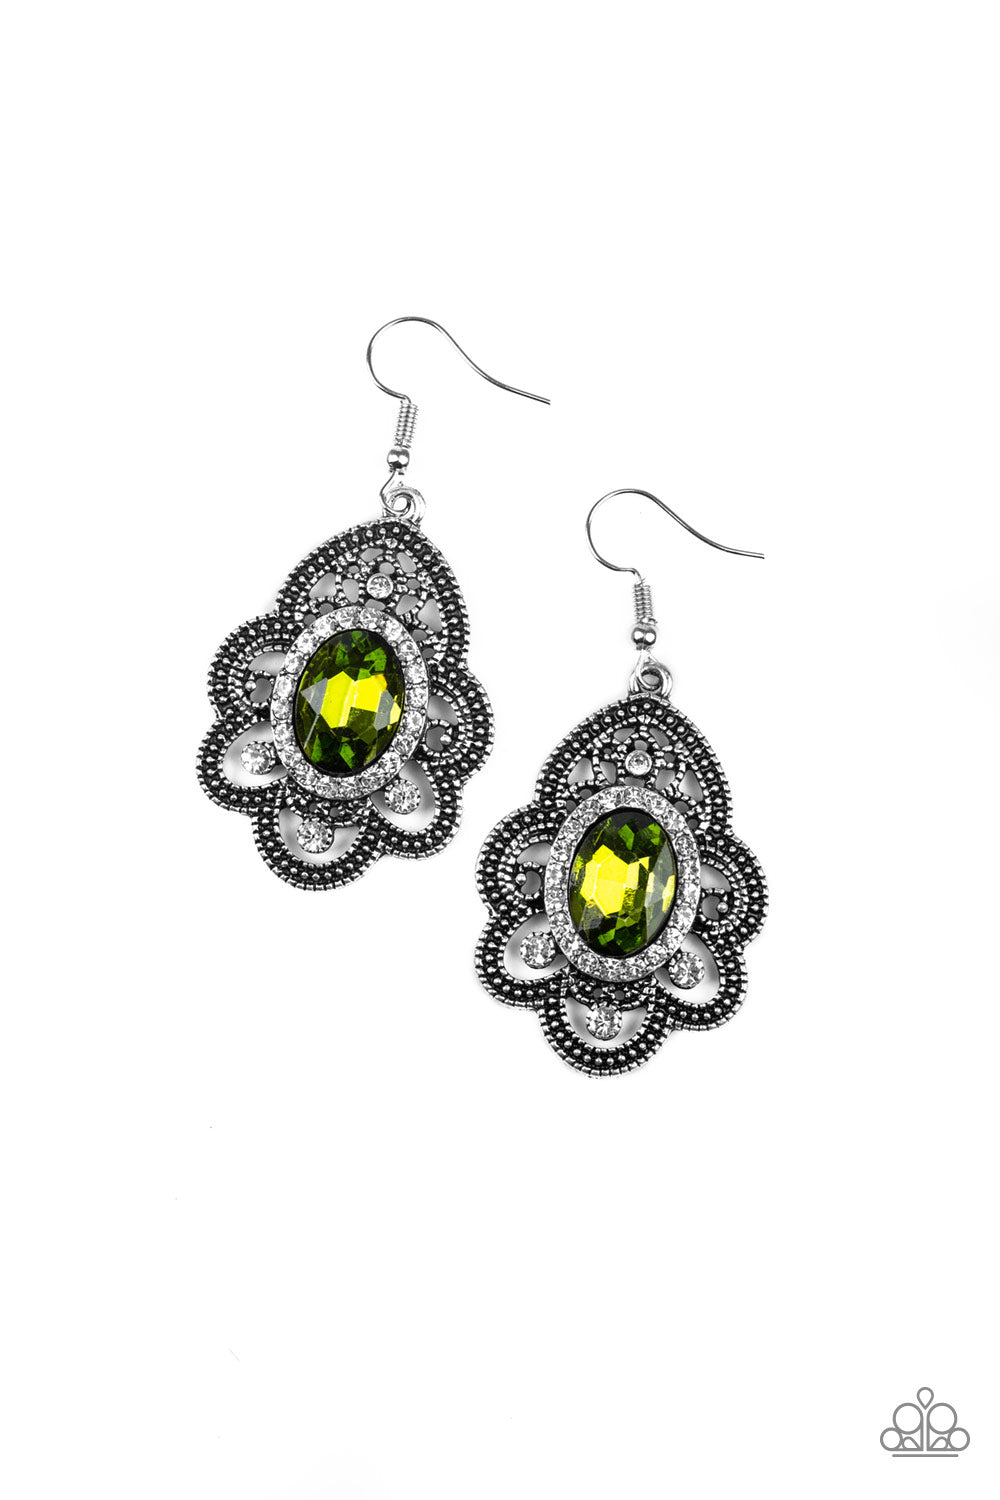 Reign Supreme - Green - Earrings - Paparazzi Accessories